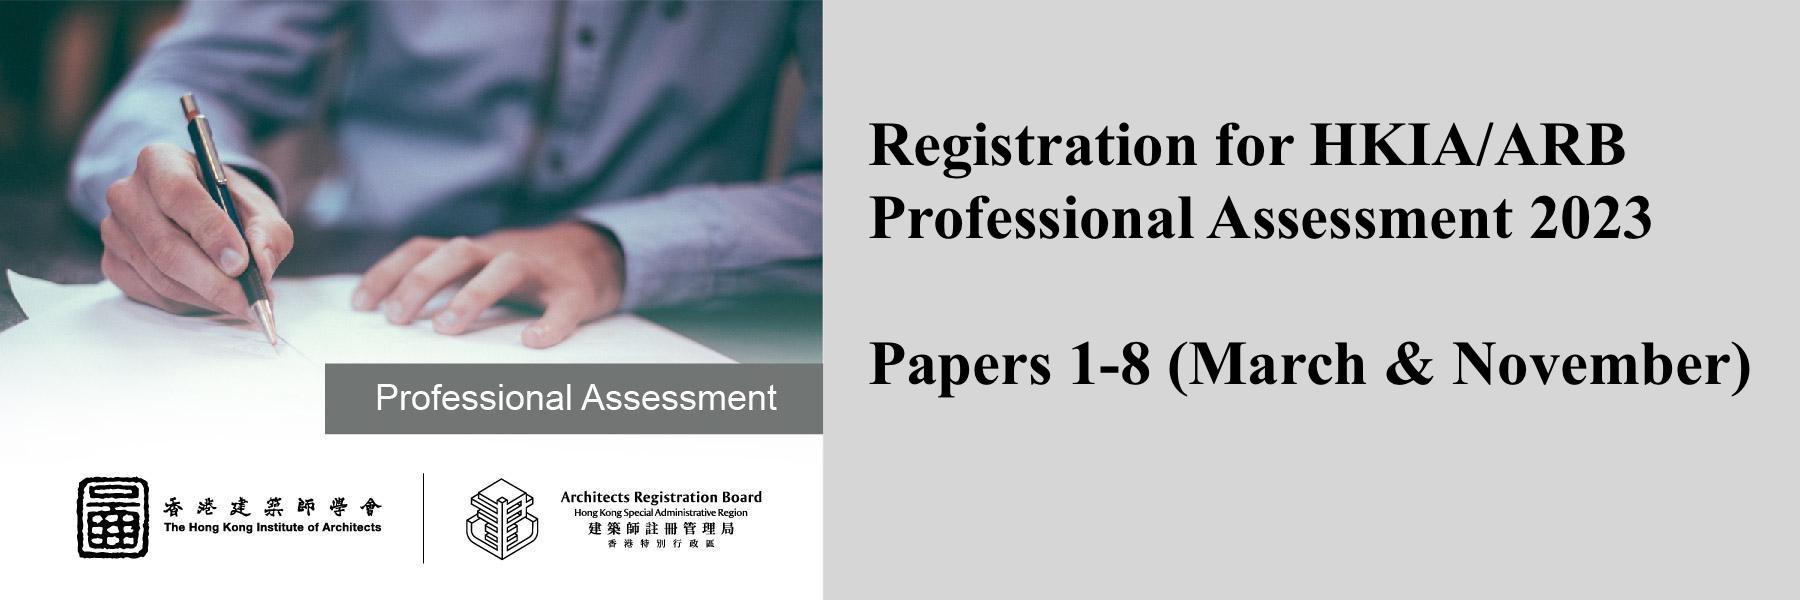 Registration for HKIA/ARB Professional Assessment 2023 – Papers 1-8 (March & November)